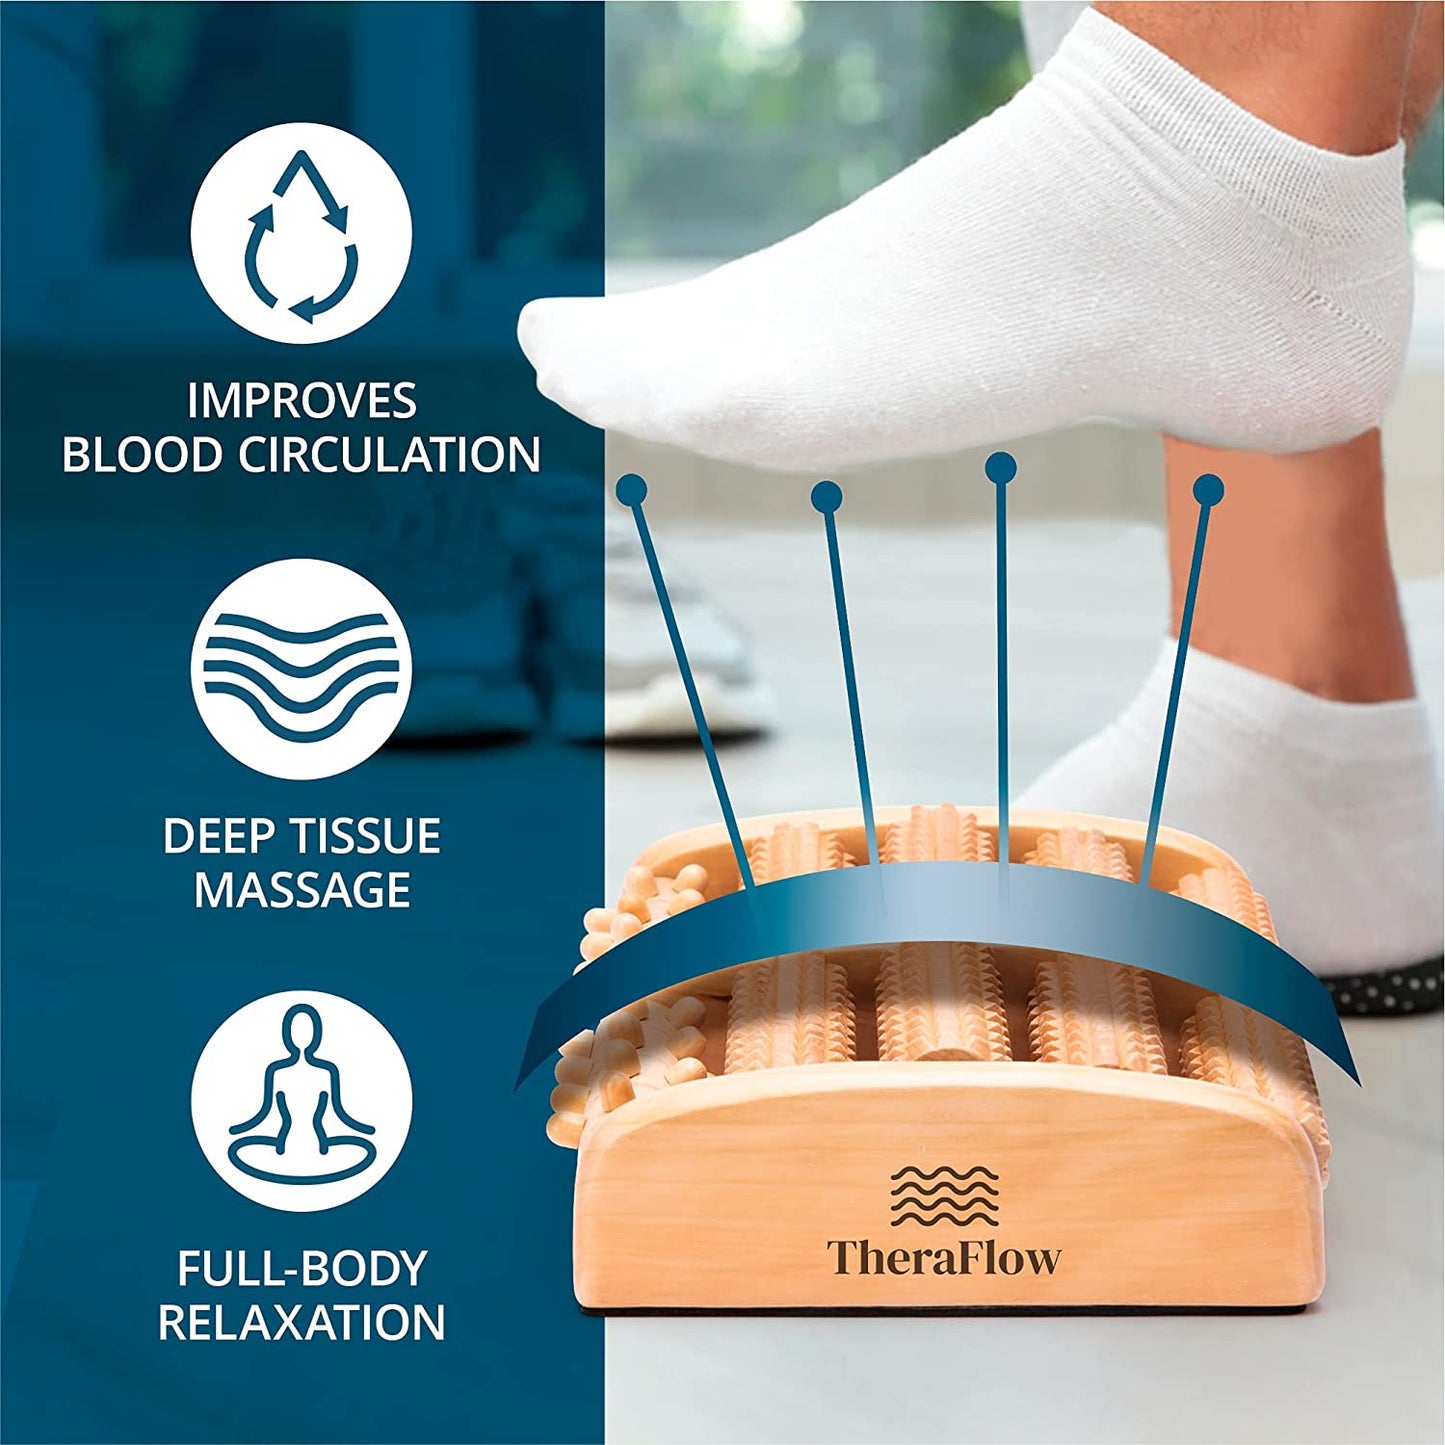 Foot Massager - Gifts for Women, Mom, Dad, Stress Relief, Plantar Fasciitis Relief - Foot Roller for Foot Pain, Neuropathy, Heel Spur Pain, Stress Relief, Wooden Reflexolo (Large)